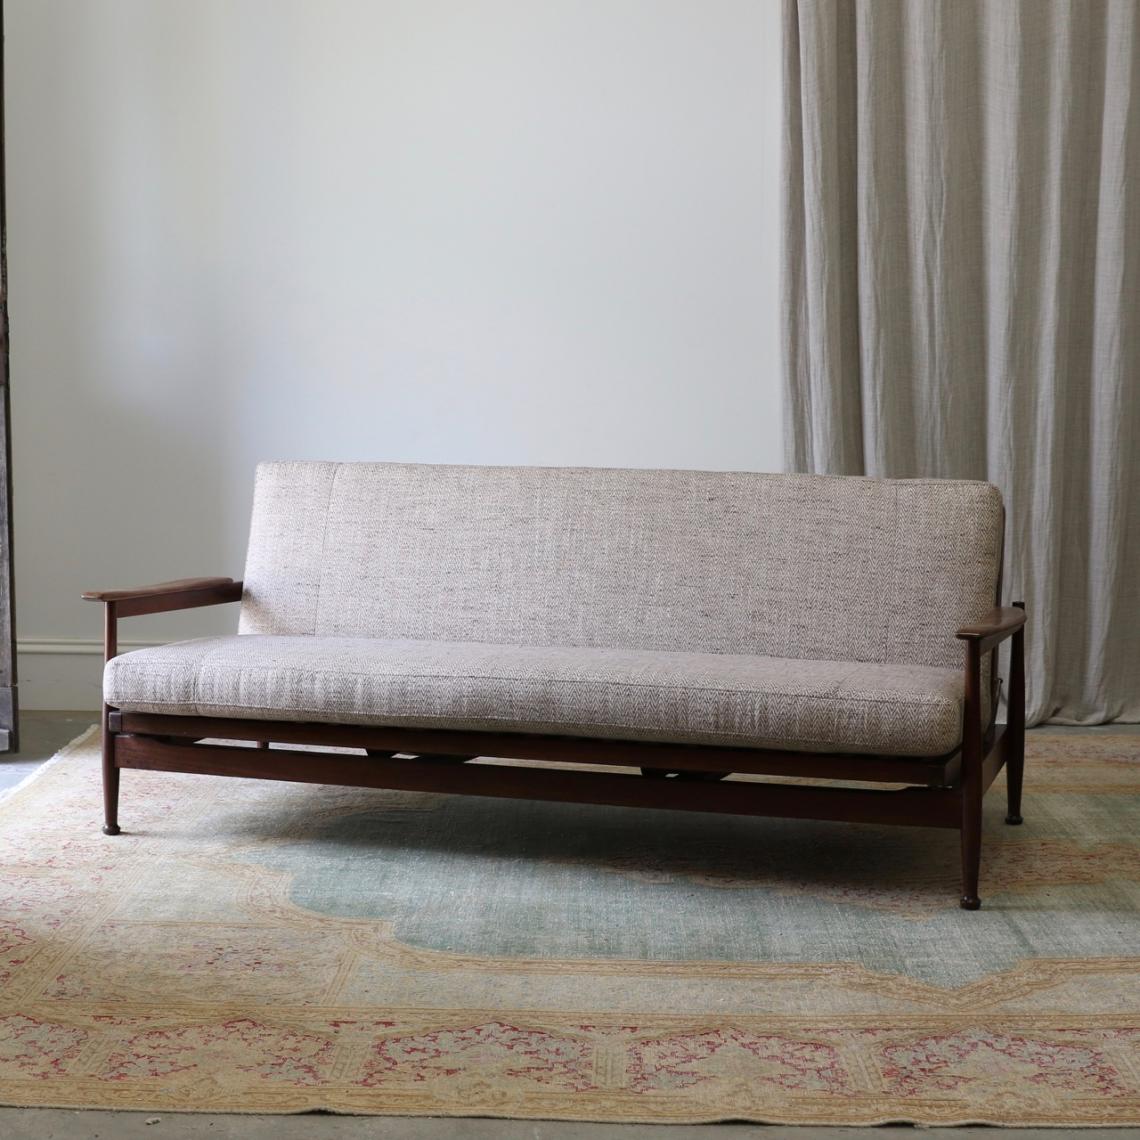 113-99 - Mid-Century Sofa / Daybed